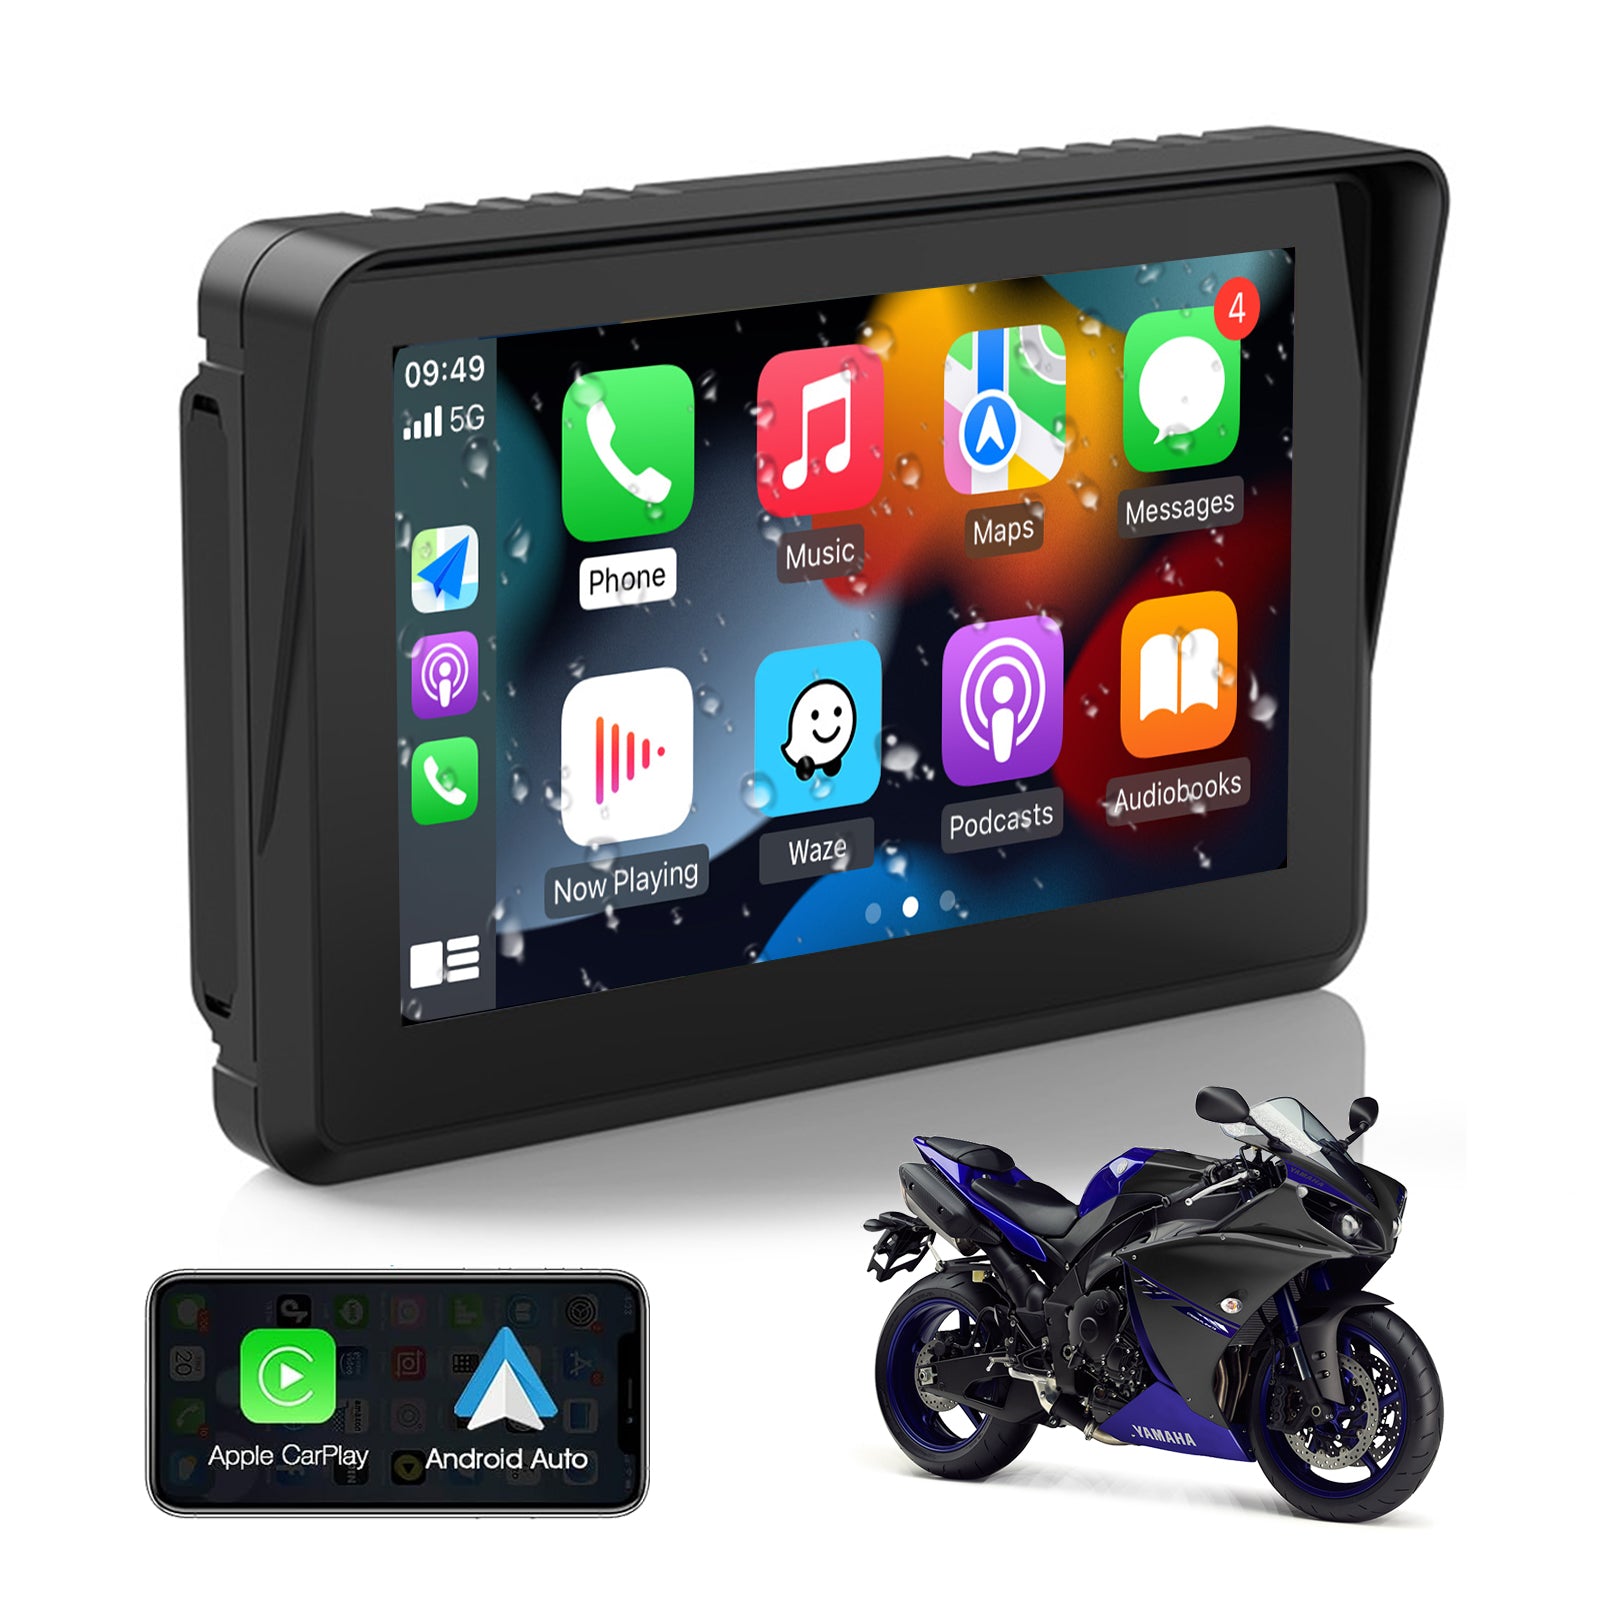 5inch video Portable Motorcycle Wireless Apple Carplay Android Auto  Navigation GPS Moto Car Play Screen IPX7 Waterproof Display